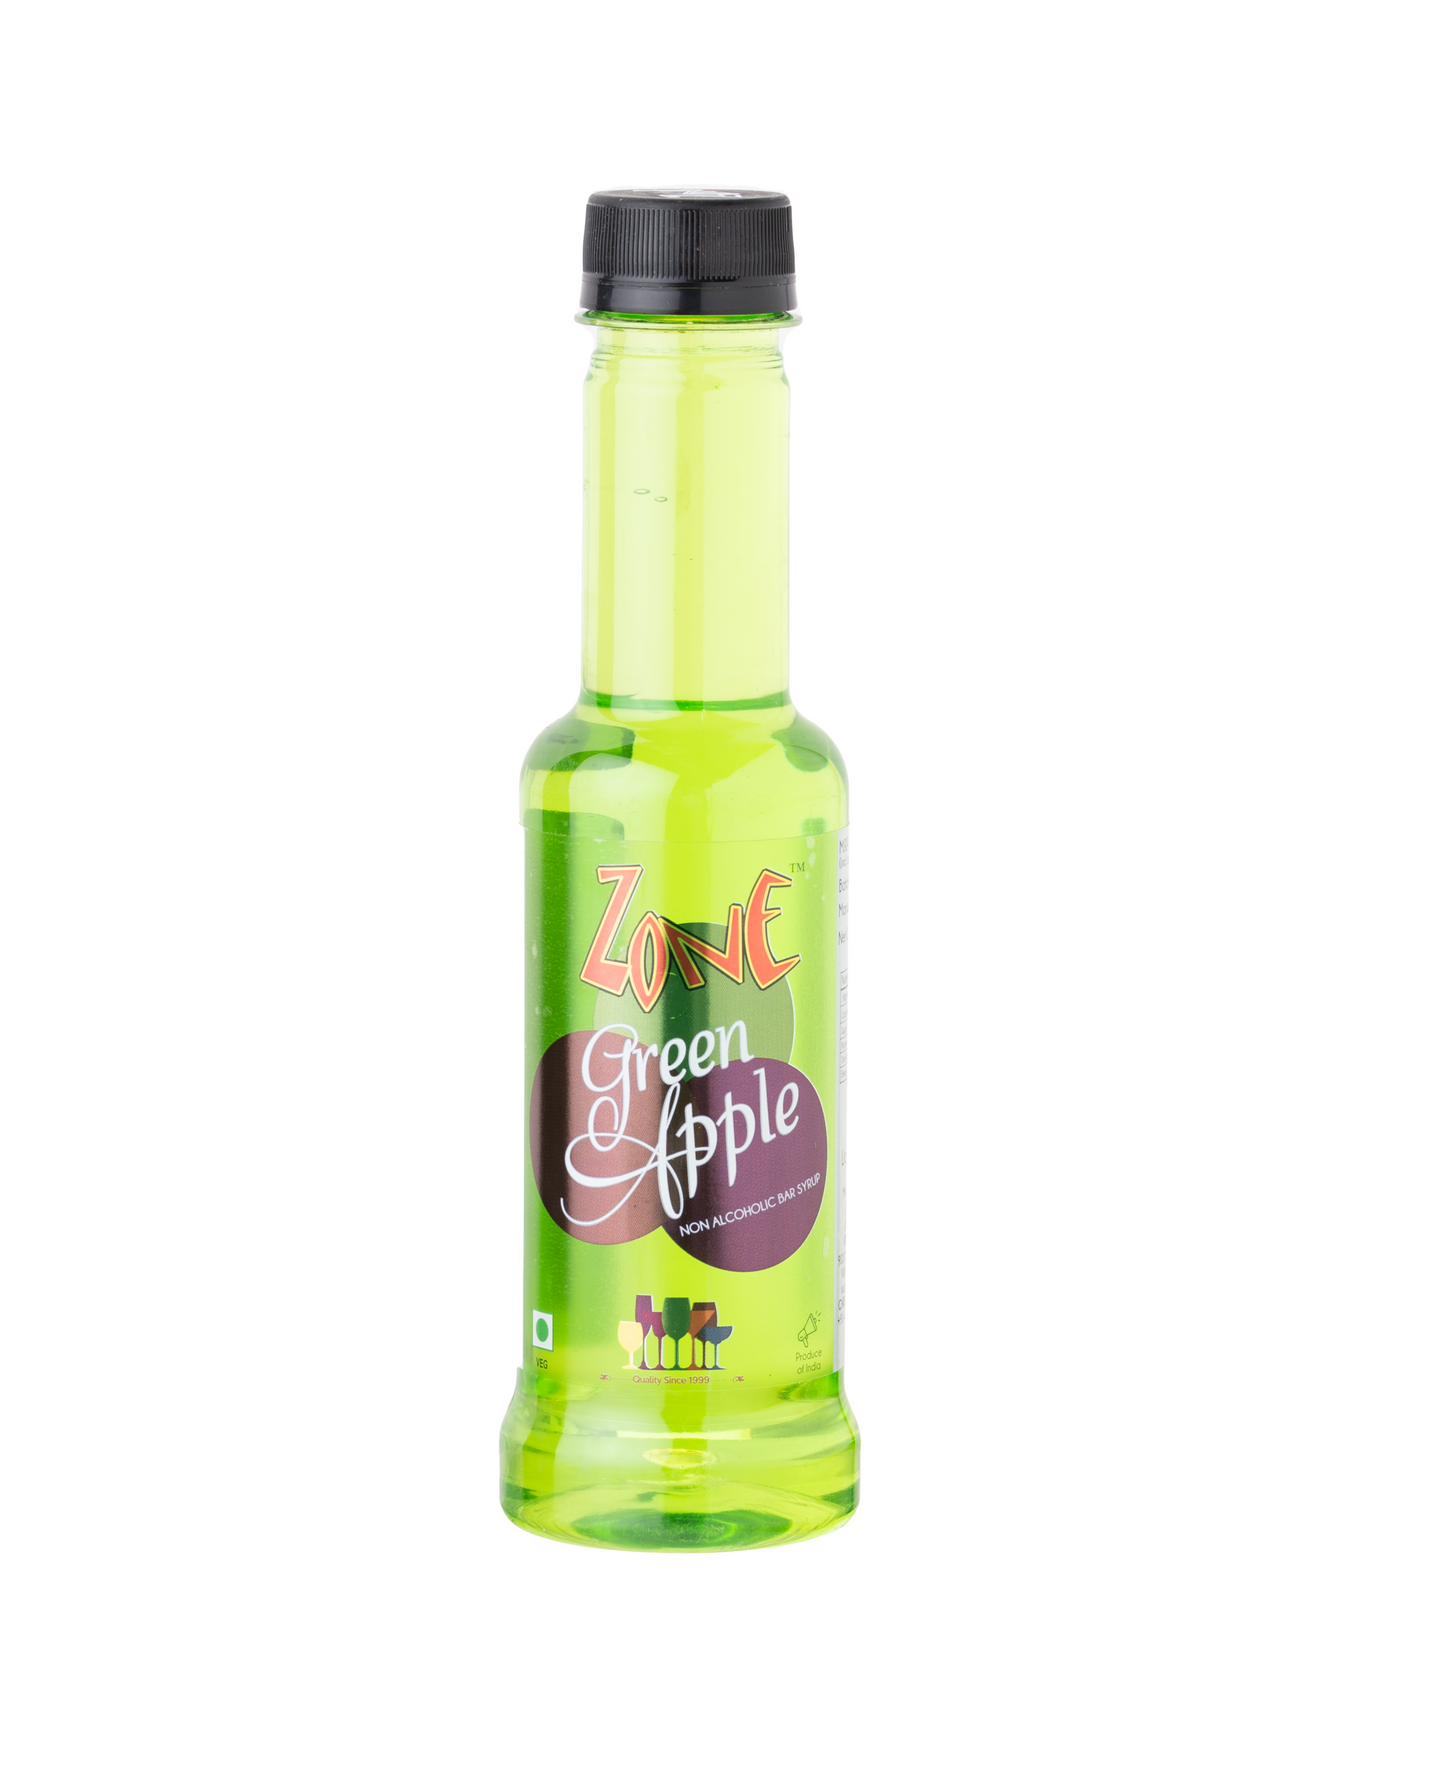 Zone Green Apple Flavoured Syrup 240ml